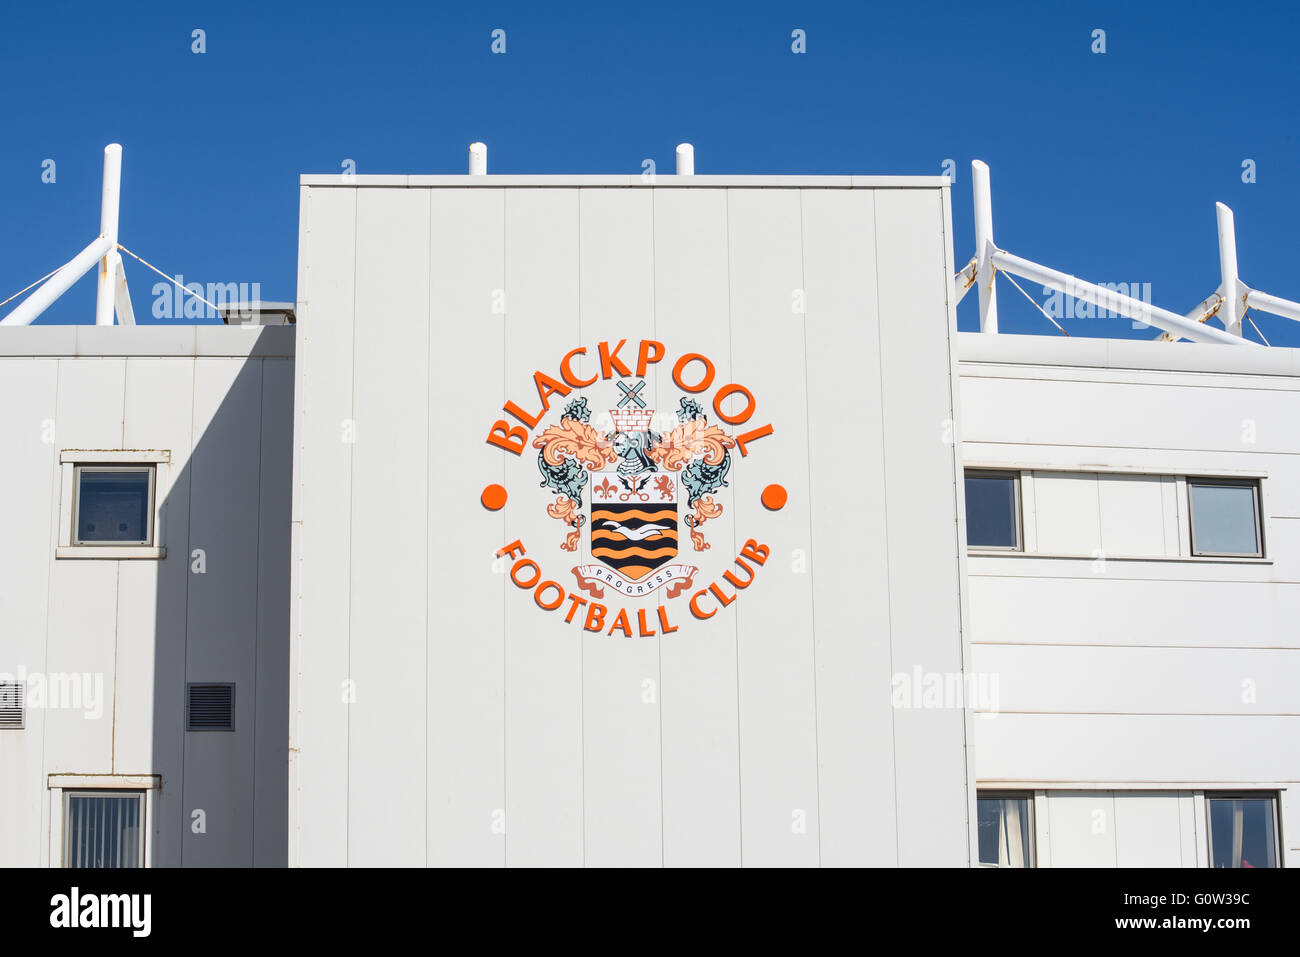 Blackpool Football Club main building showing the club name and emblem, photographed against a blue sky Stock Photo